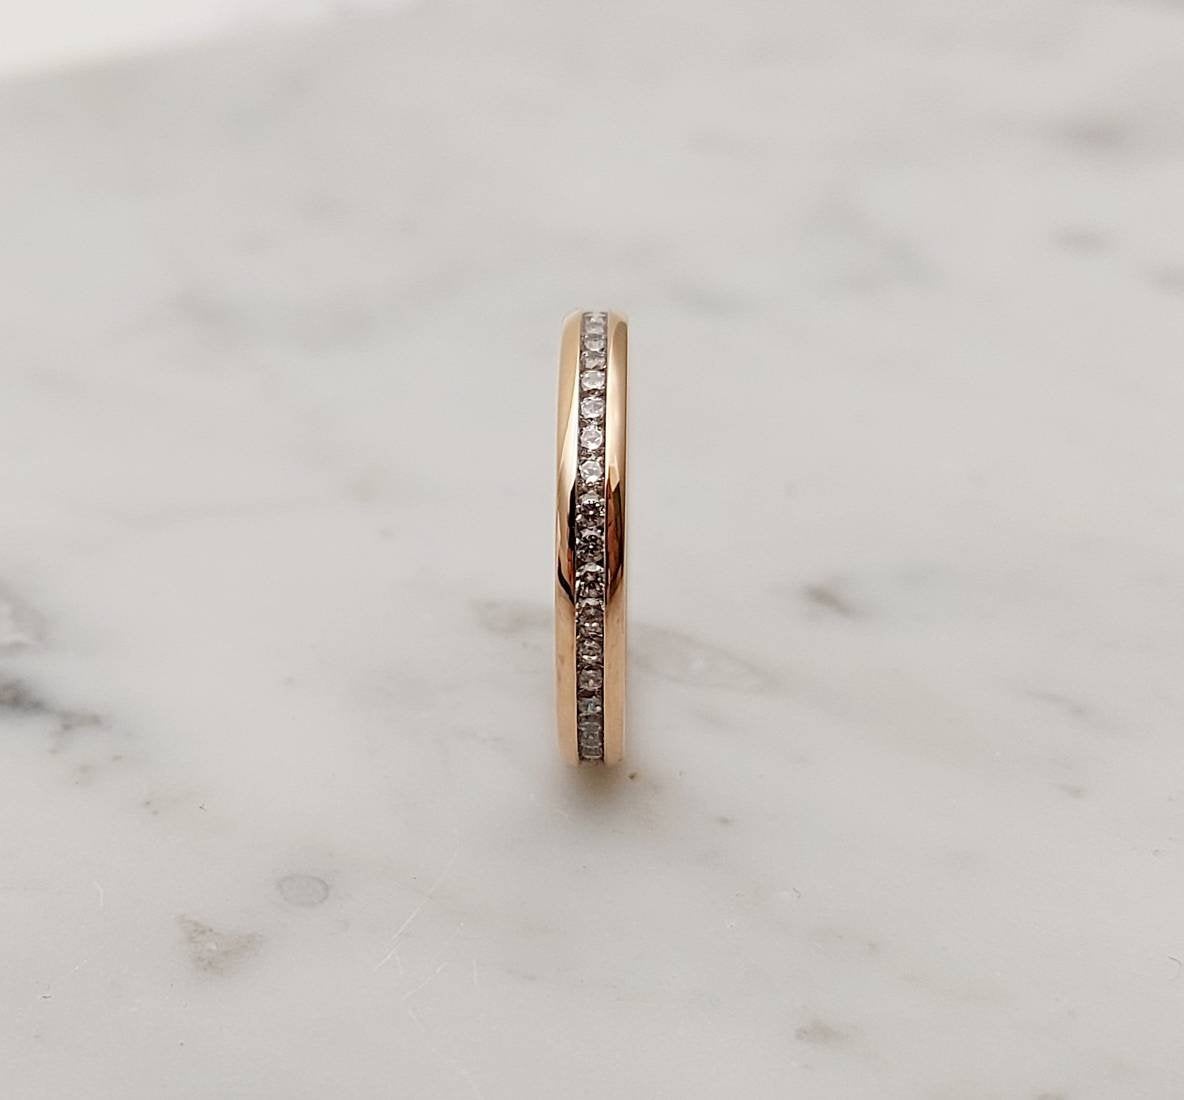 3mm Wide Man Made Diamond Simulant Full Eternity ring / stacking ring in rose gold filled - Wedding Band - Engagement ring